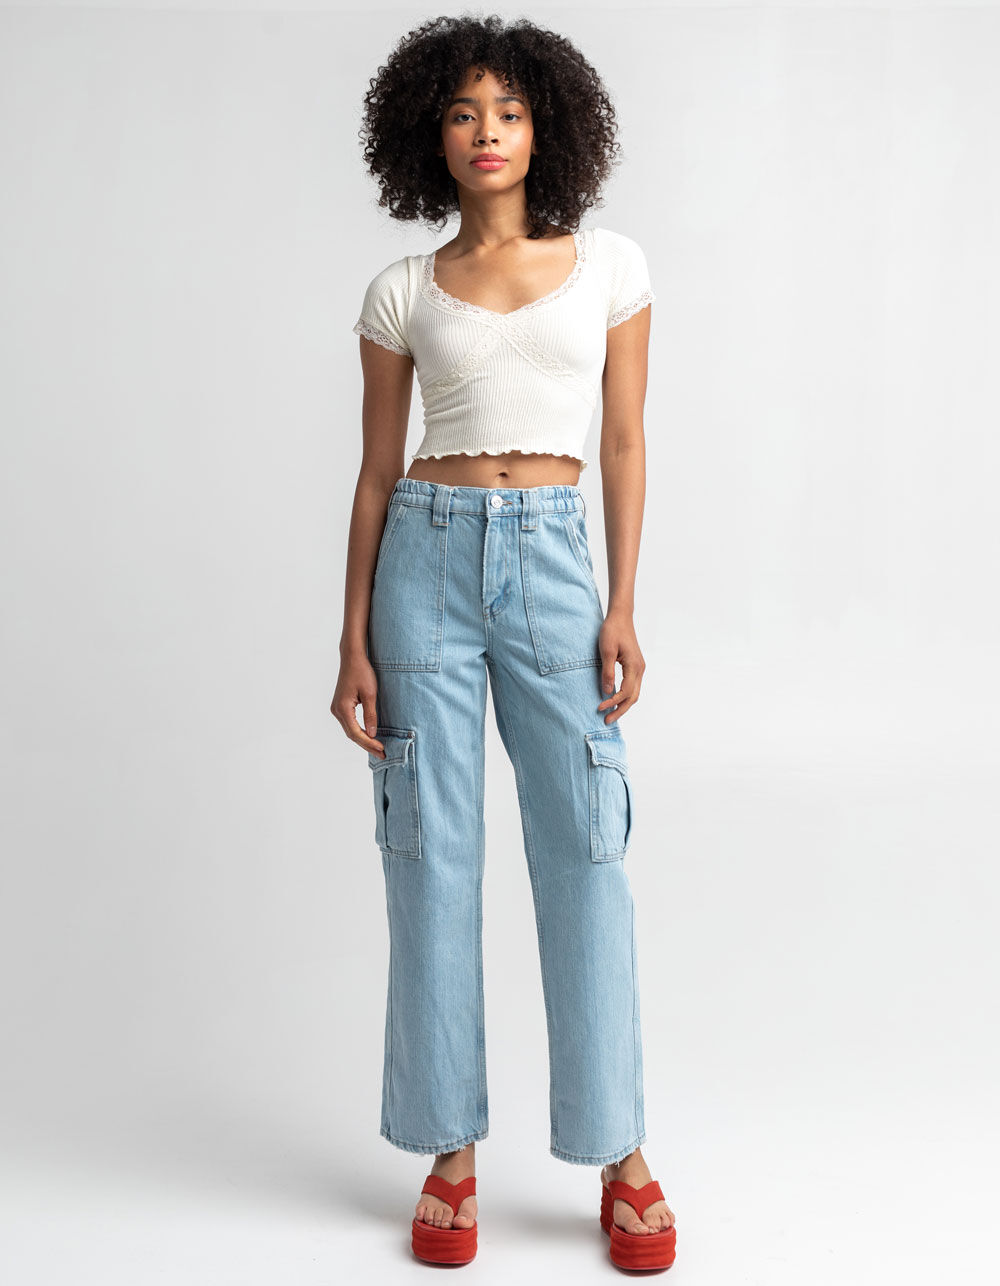 BDG Urban Outfitters Womens Skate Jeans - LIGHT WASH | Tillys